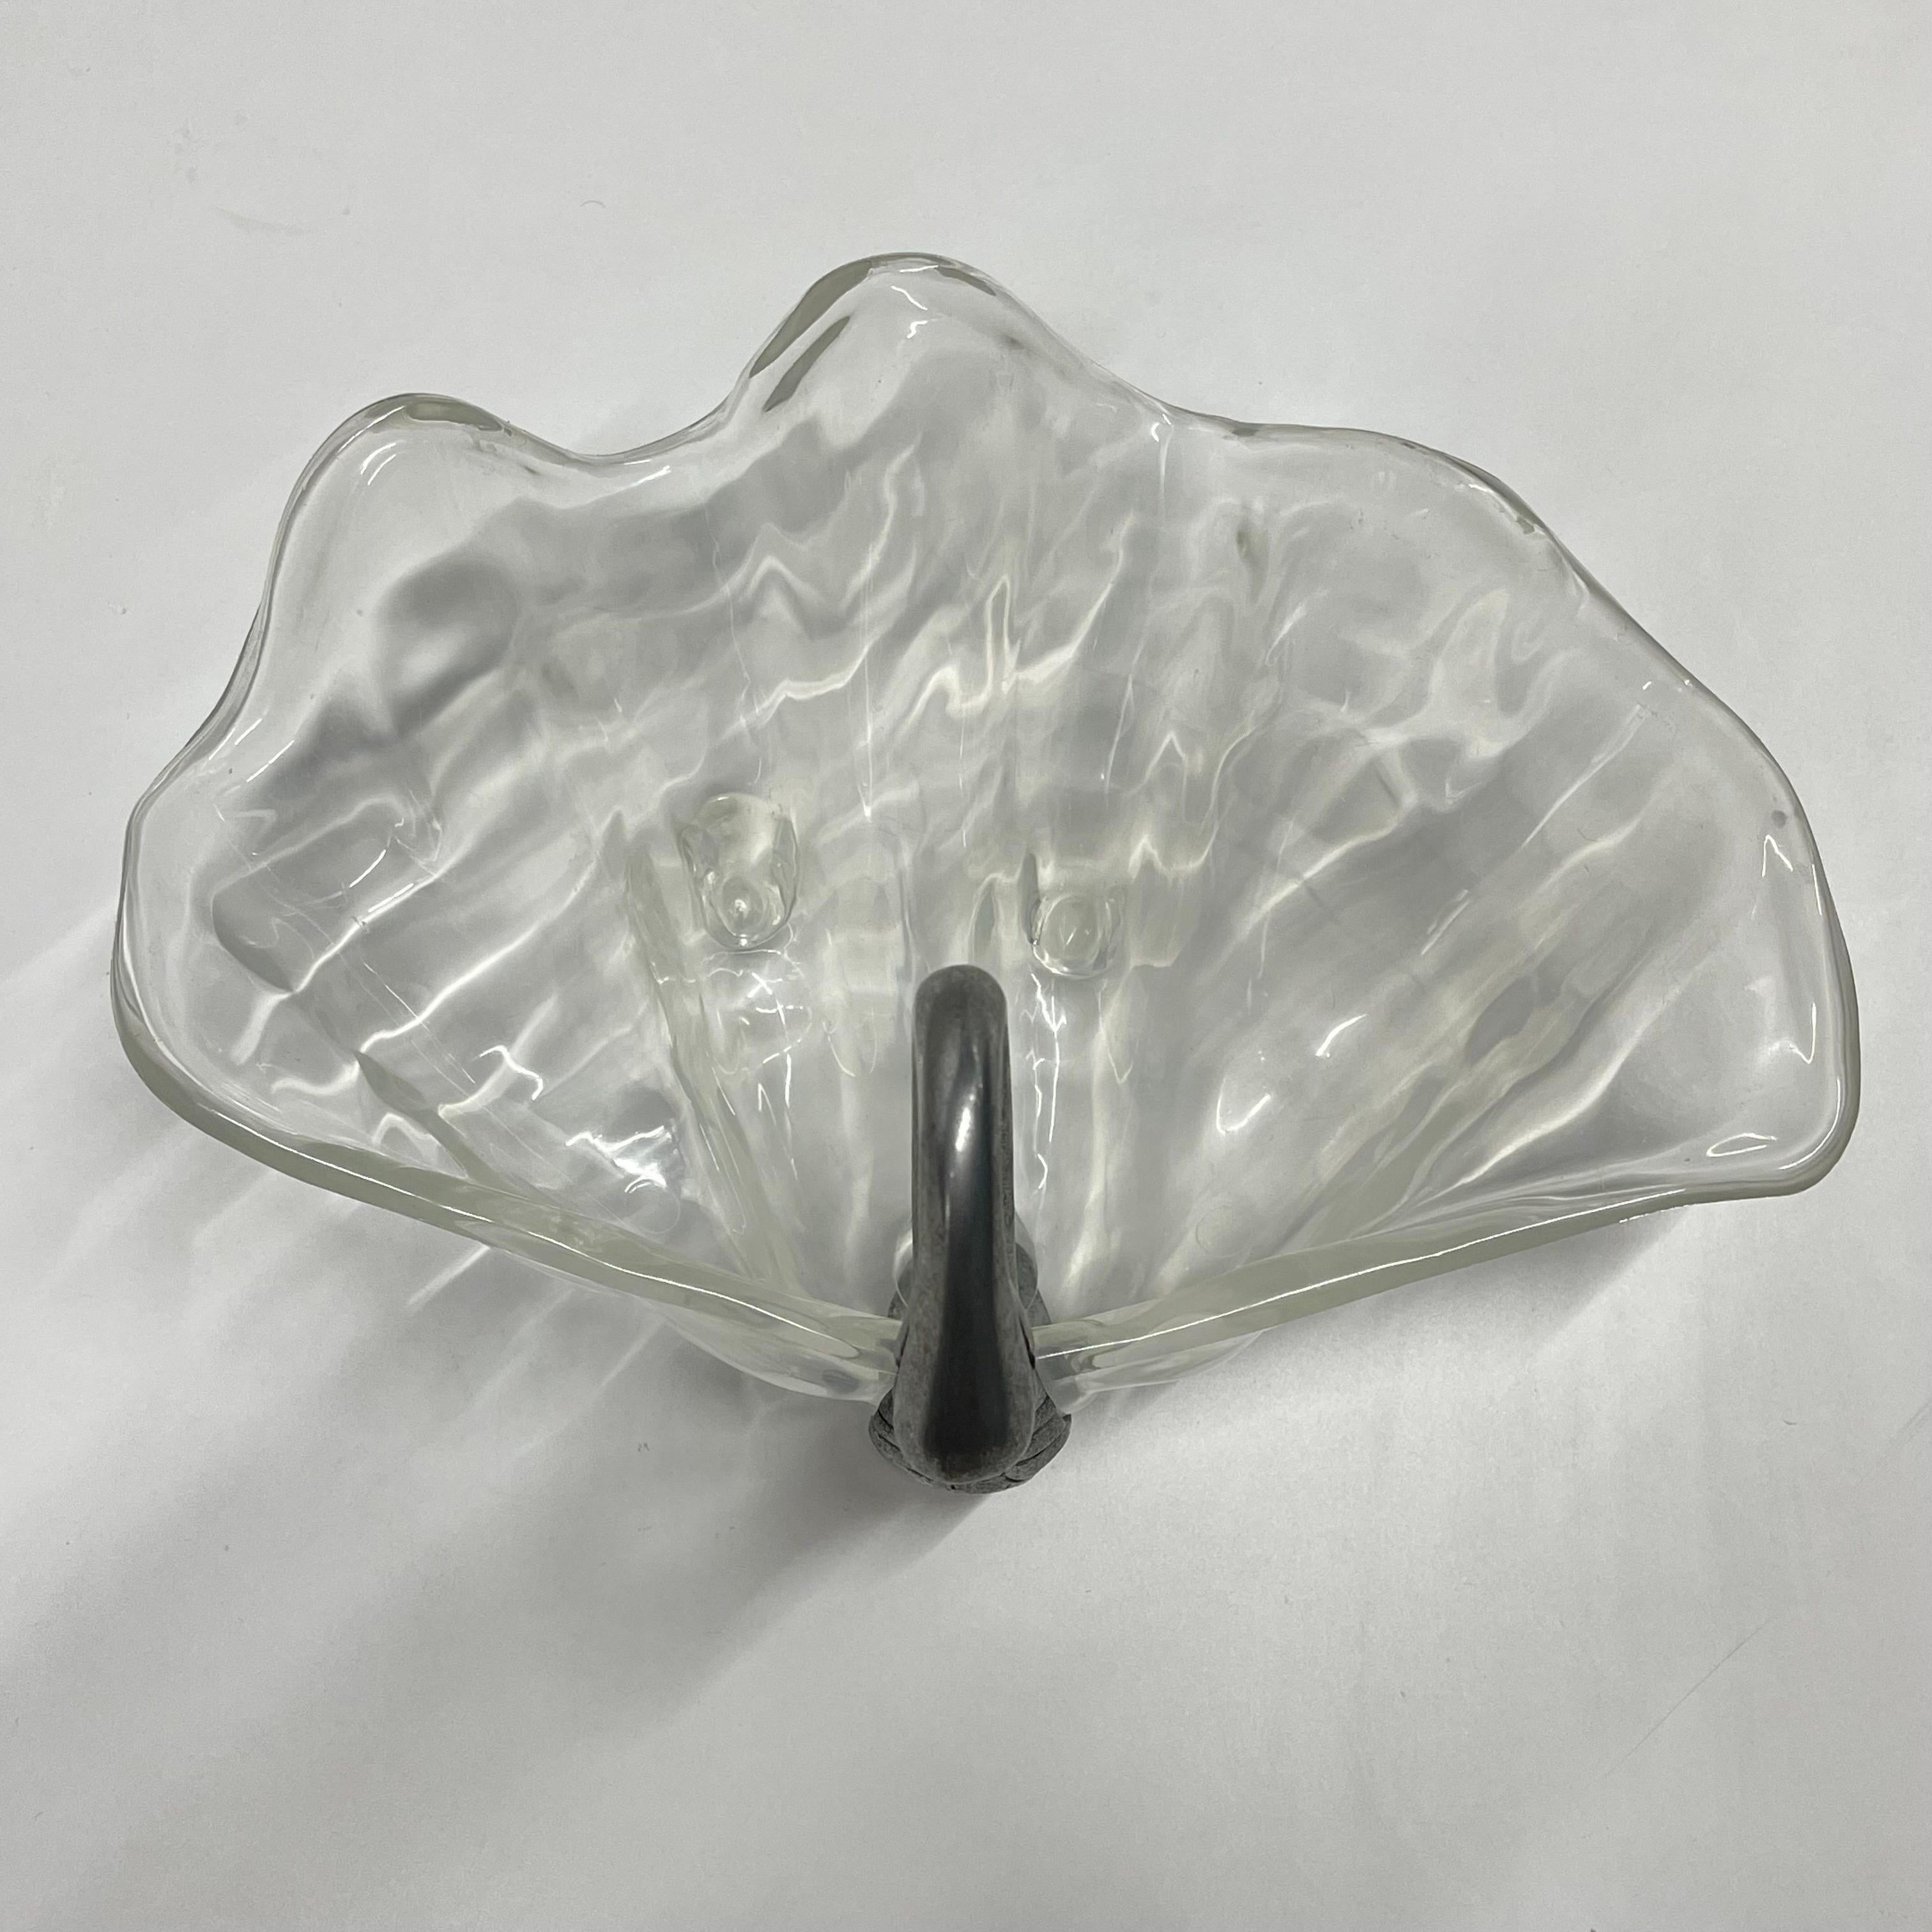 Midcentury Arthur Court Swan Shell Centerpiece Severing Dish, Usa, circa 1970s For Sale 1